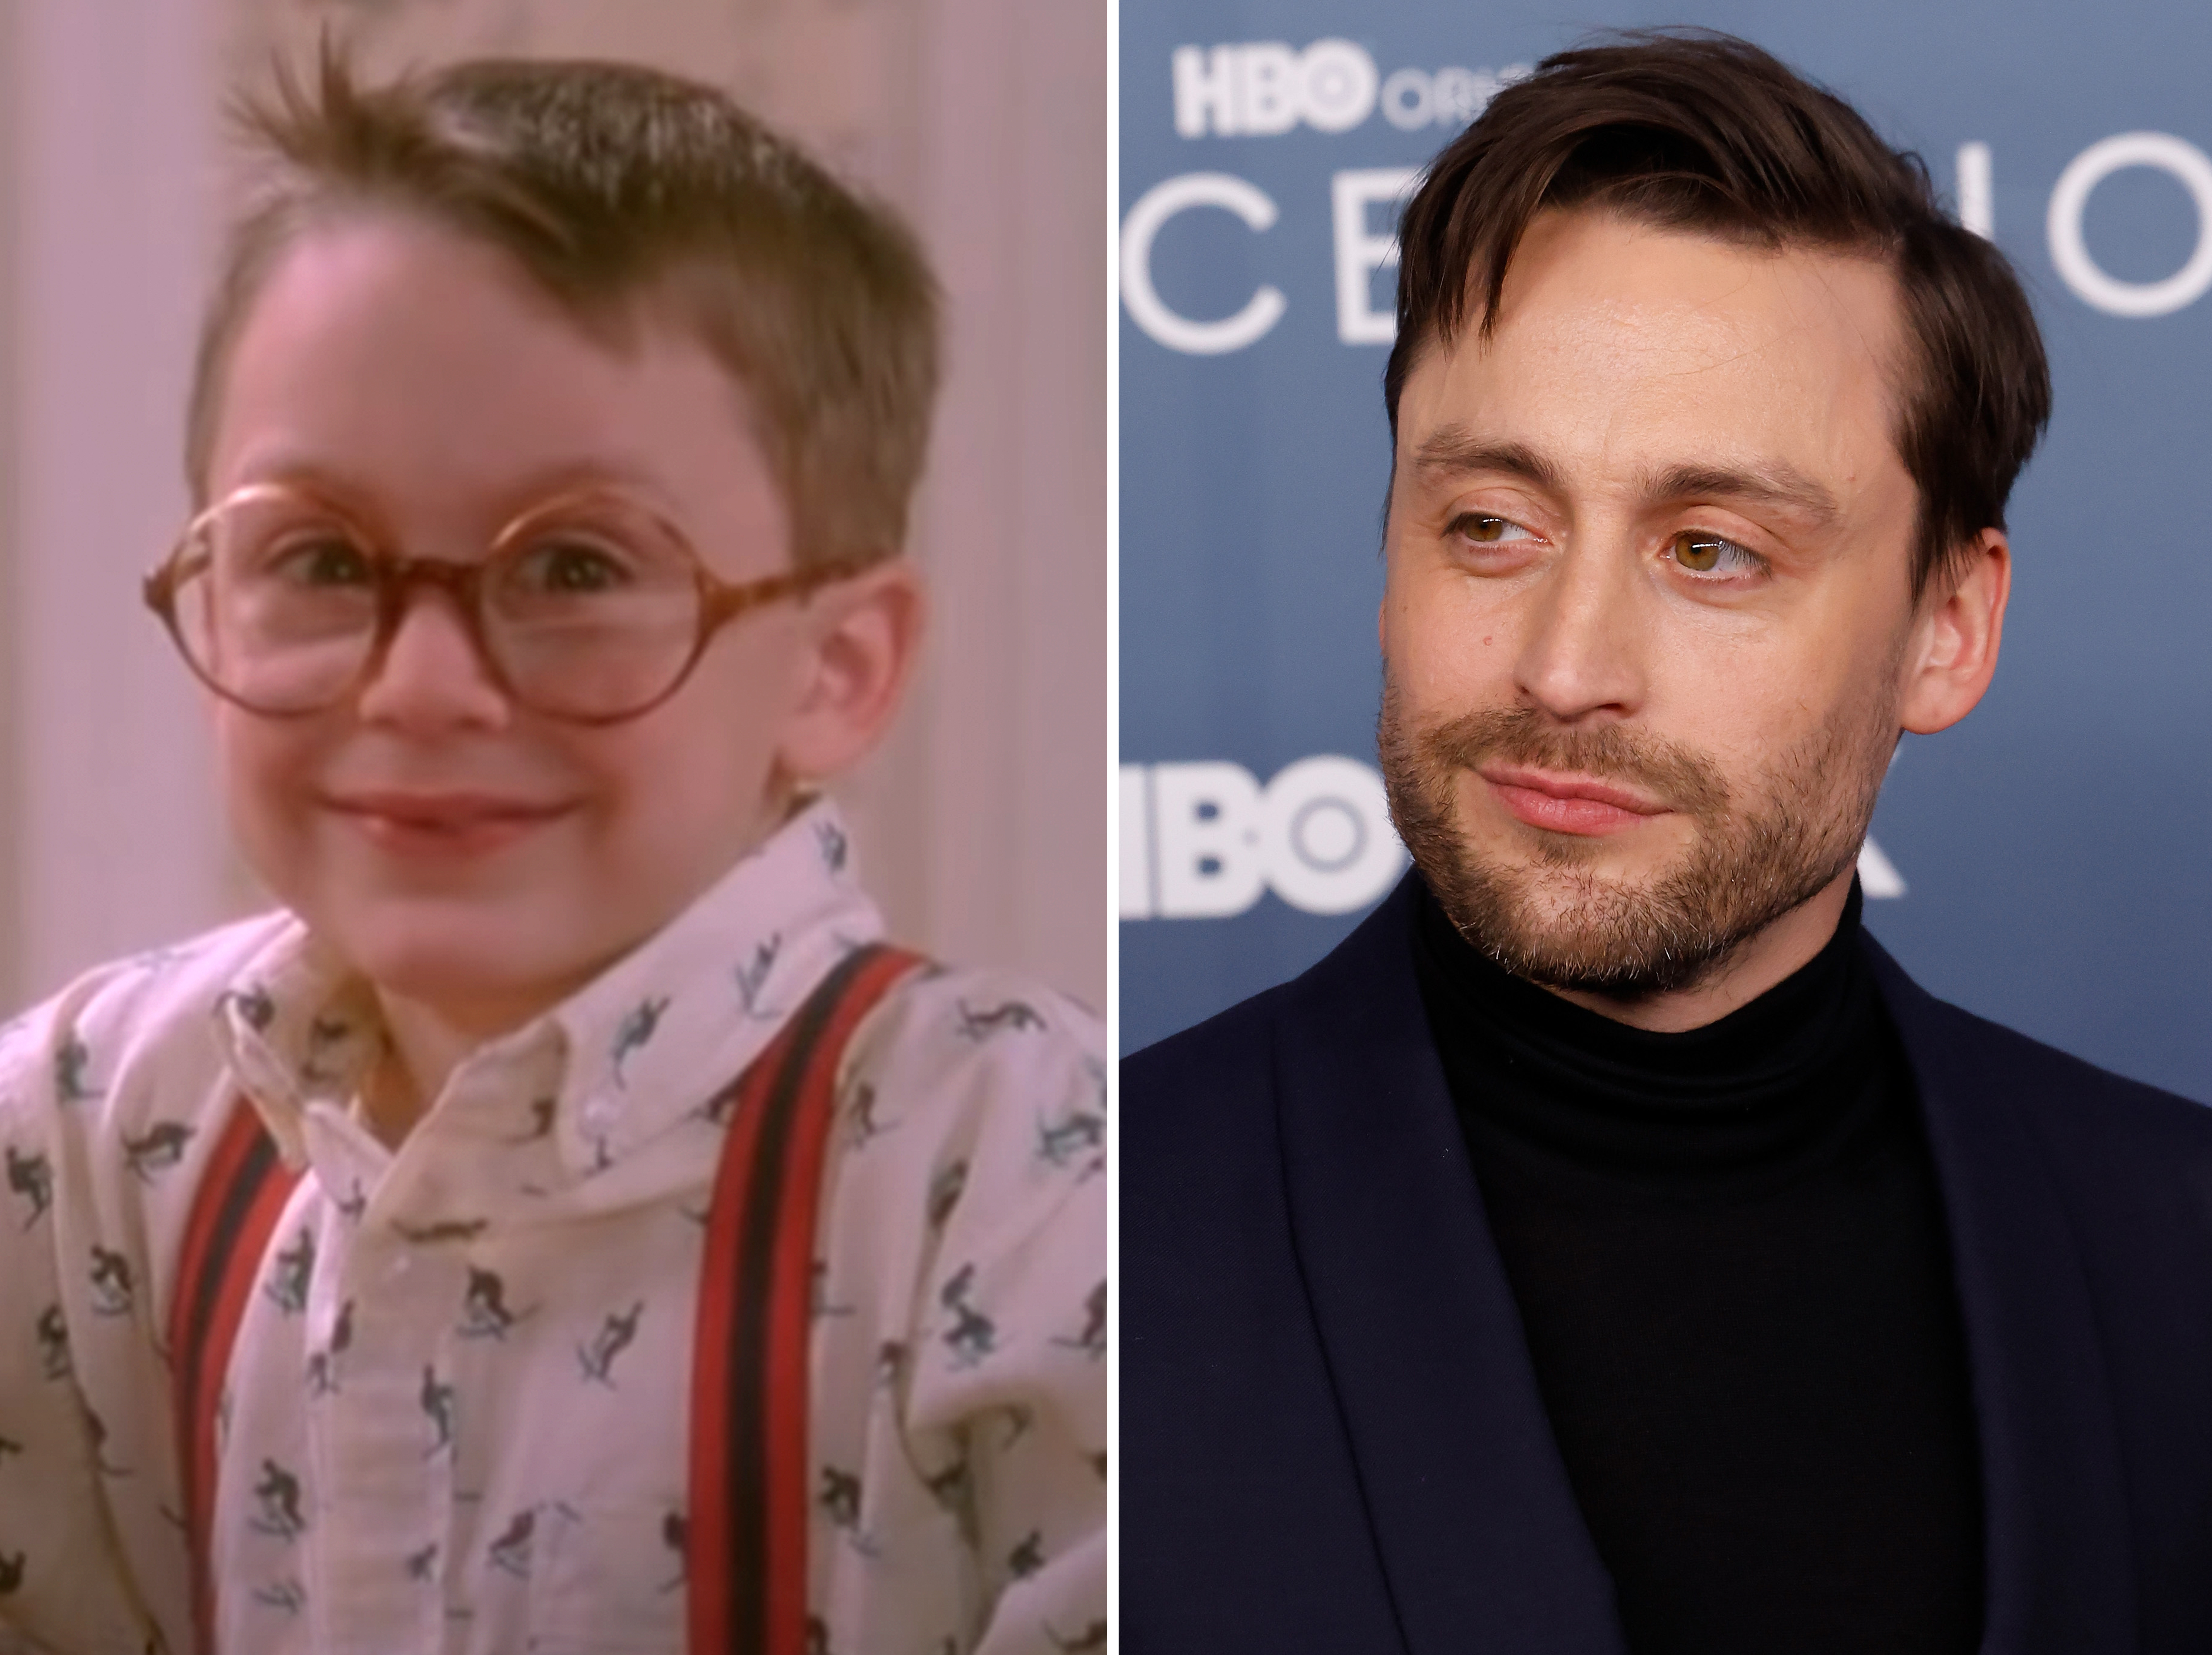 Kieran Culkin as Fuller McCallister in "Home Alone," 1990,  posted on December 8, 2011 | Kieran Culkin at the season 4 premiere of "Succession" in New York City on March 20, 2023 | Sources: Youtube/charminglyobsolete | Getty Images